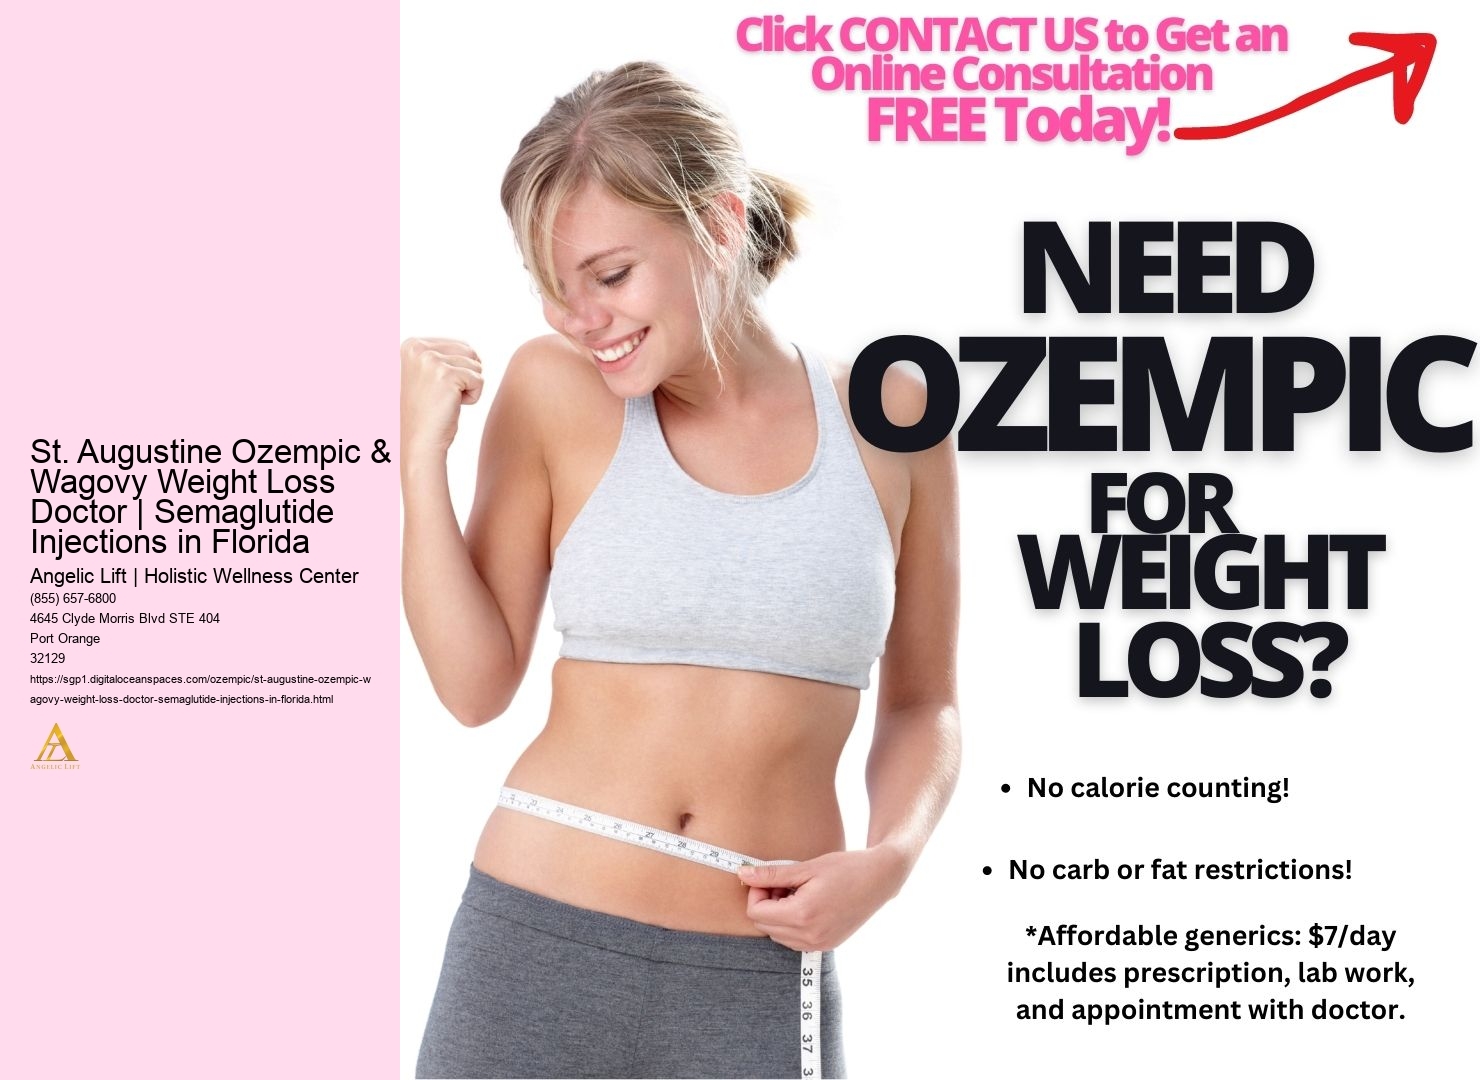 St. Augustine Ozempic & Wagovy Weight Loss Doctor | Semaglutide Injections in Florida